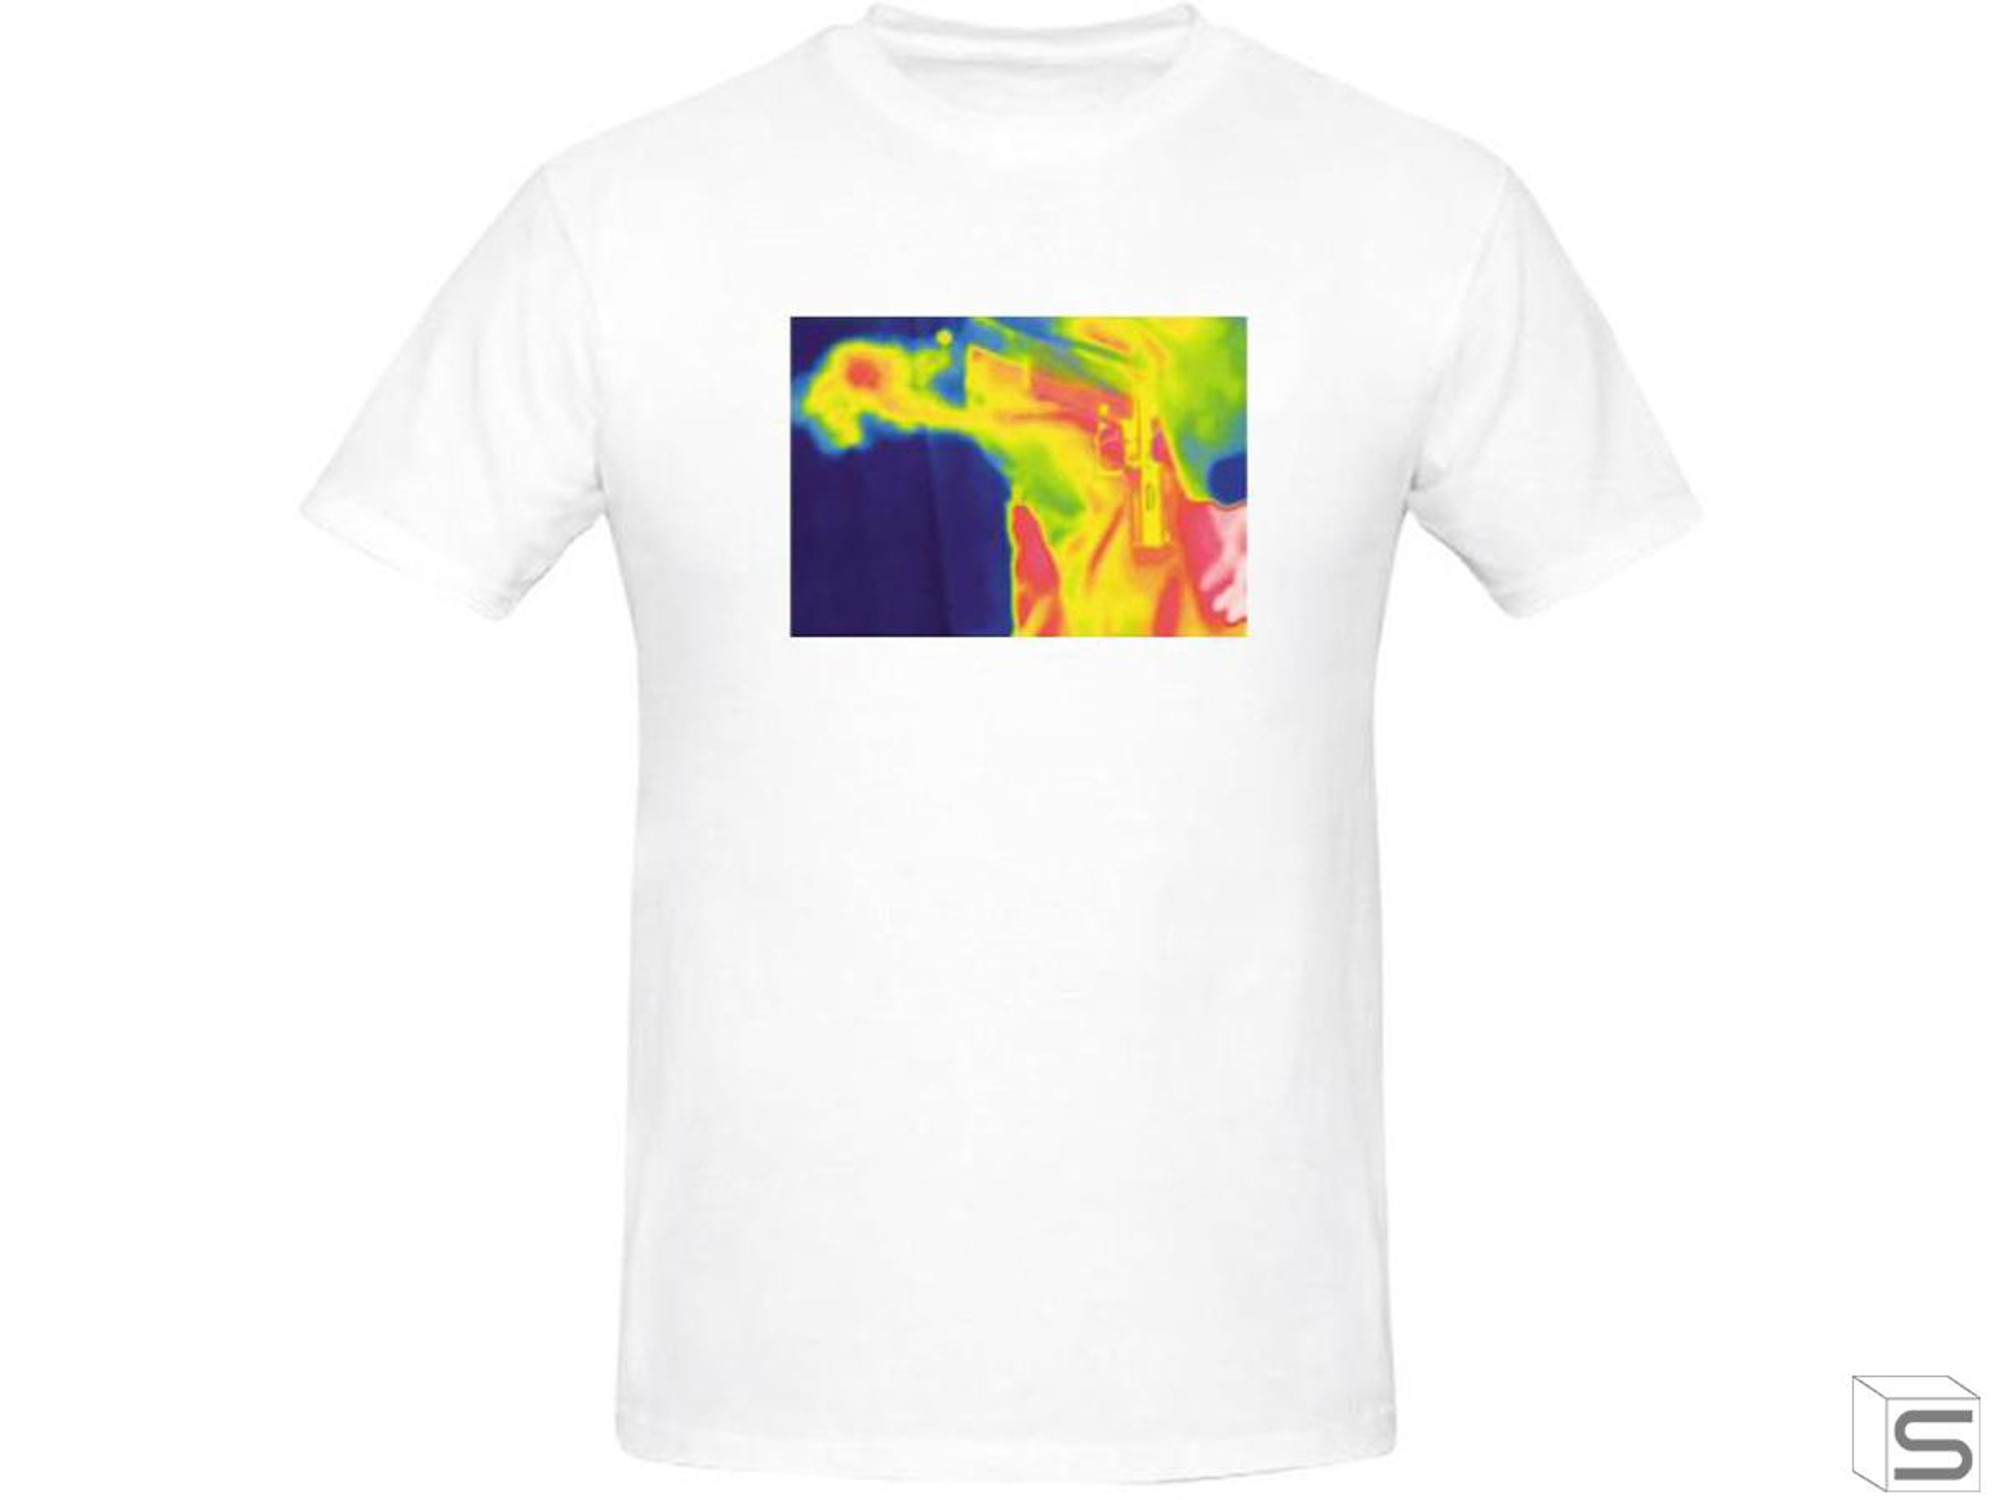 Salient Arms "Thermal Fart" Screen Printed Cotton T-Shirt - White